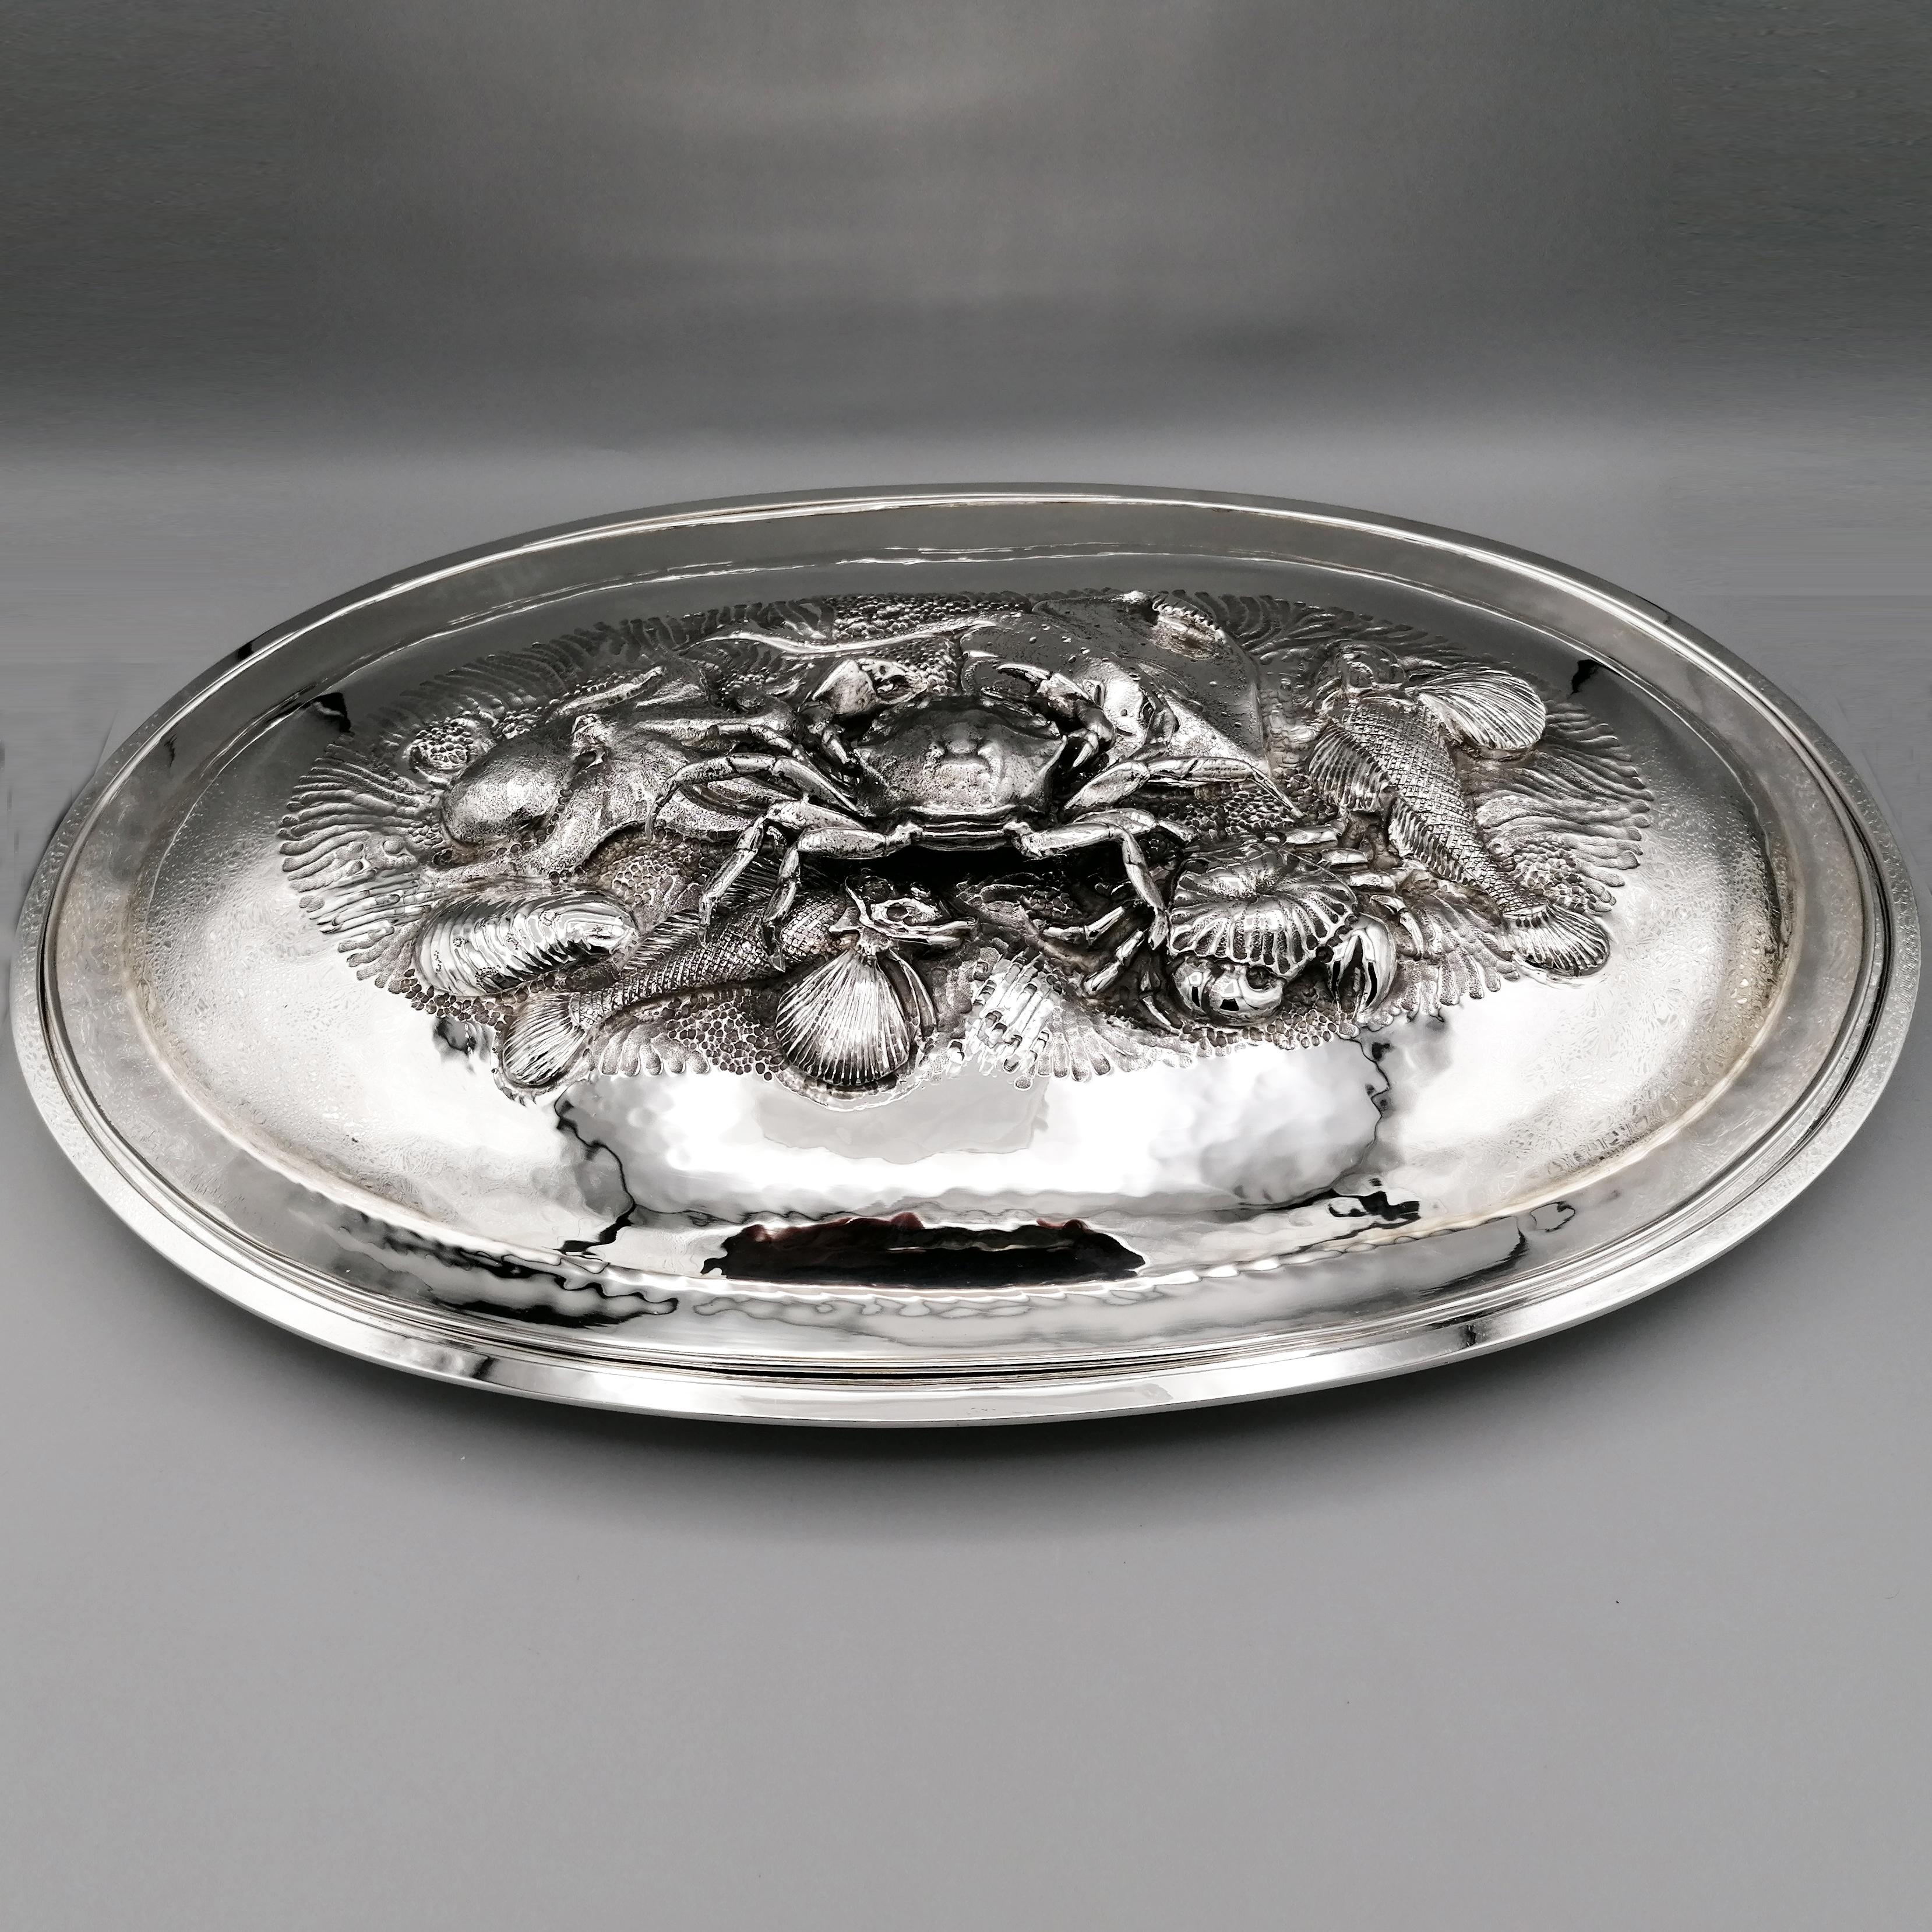 Serving plate for fish and shellfish in 800 solid silver.
The plate, completely handmade, is oval and has been completely hammered by hand.
The lid, in addition to being hammered as well, has been embossed and chiseled with marine motifs in their